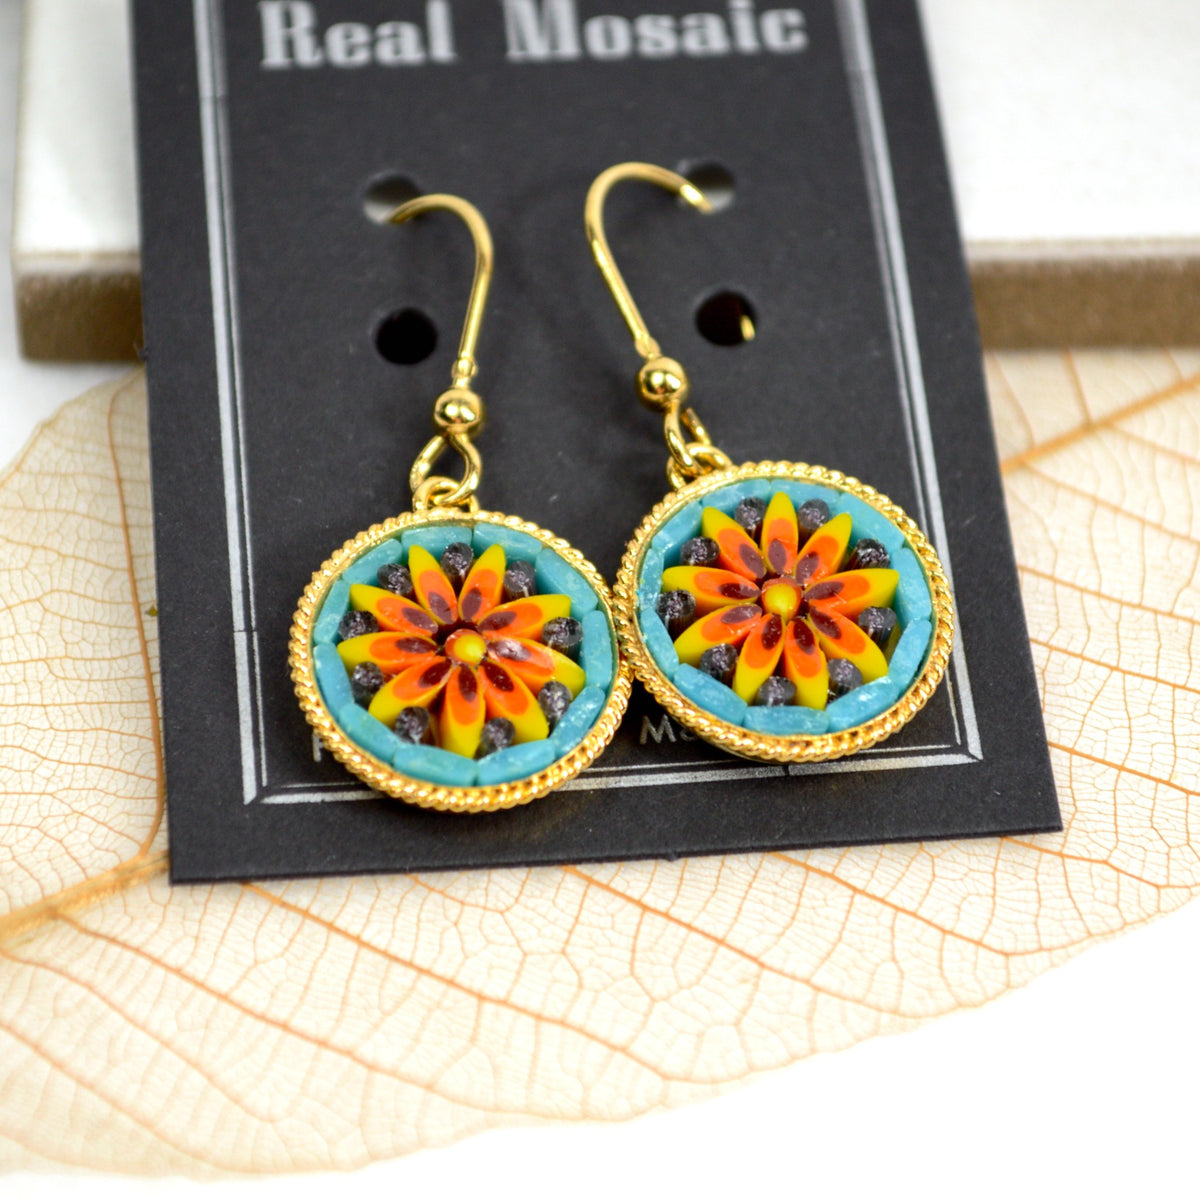 Florentine Micro Mosaic Earrings, Large Circle, Made in Italy - My Italian Decor